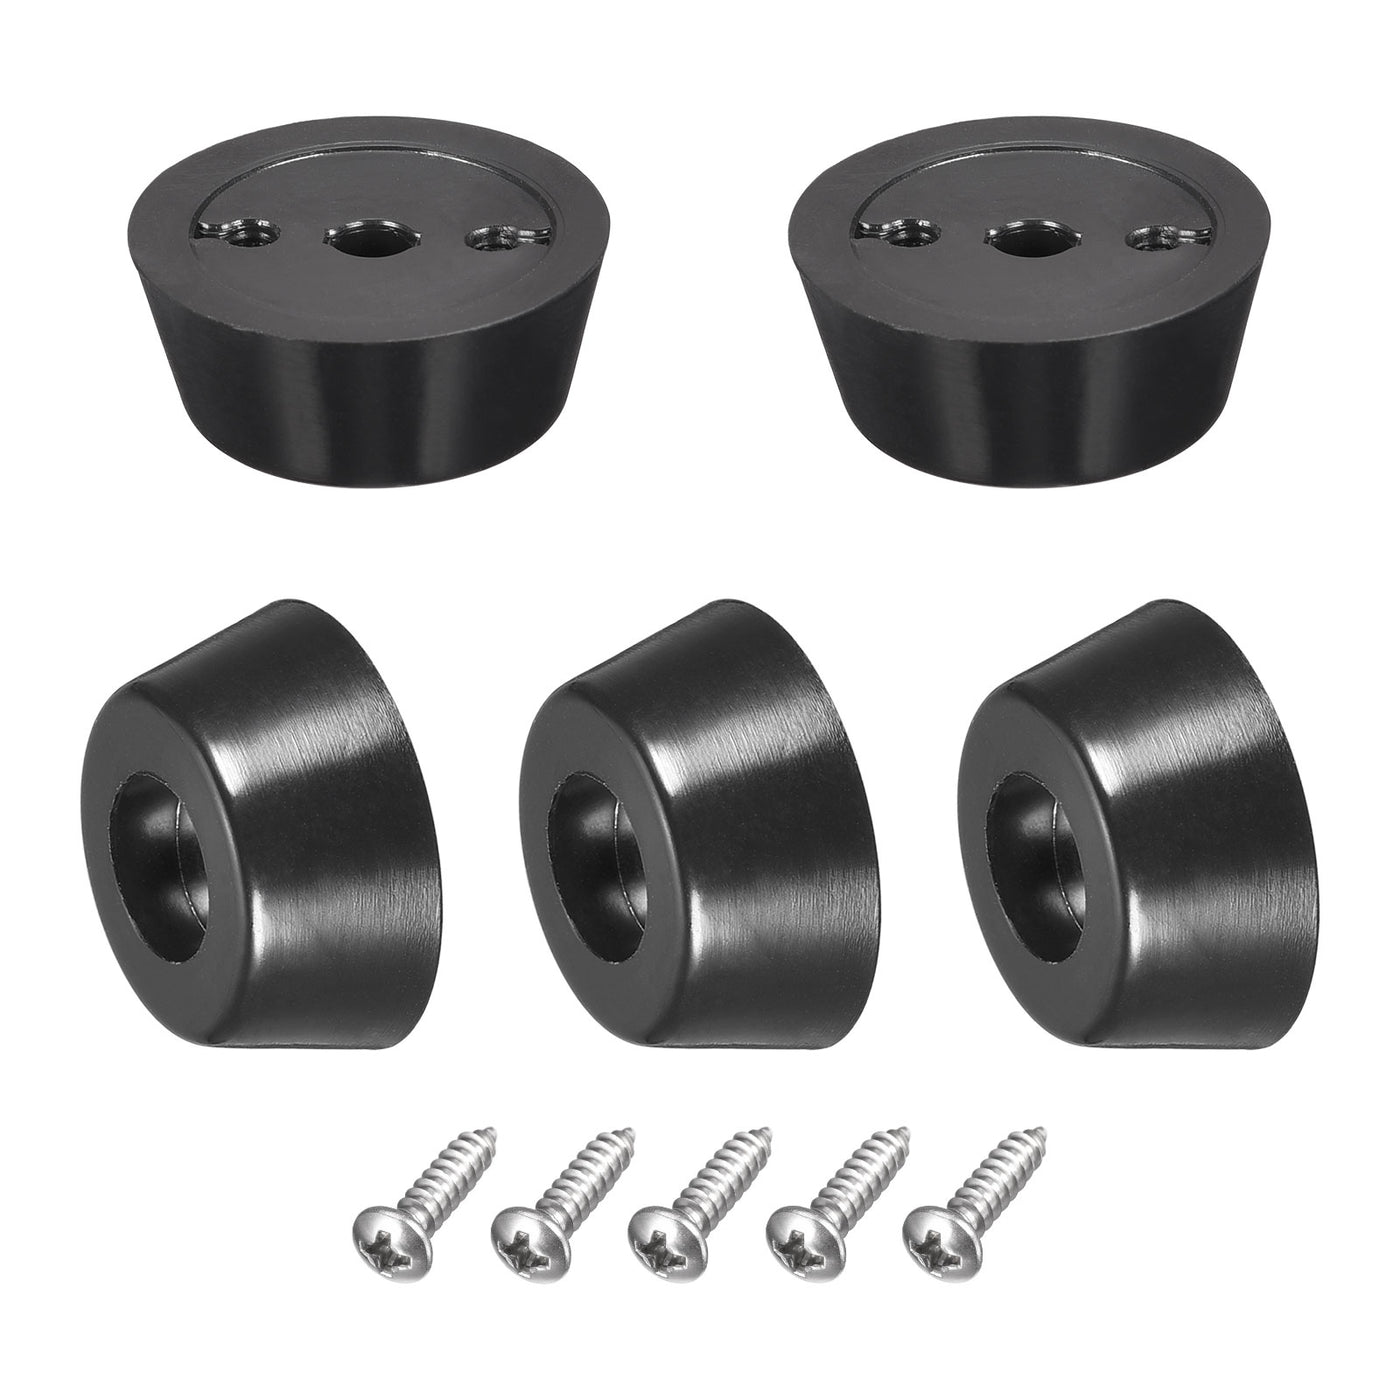 uxcell Uxcell 20mm W x 8mm H Rubber Bumper Feet, Stainless Steel Screws and Washer 16pcs